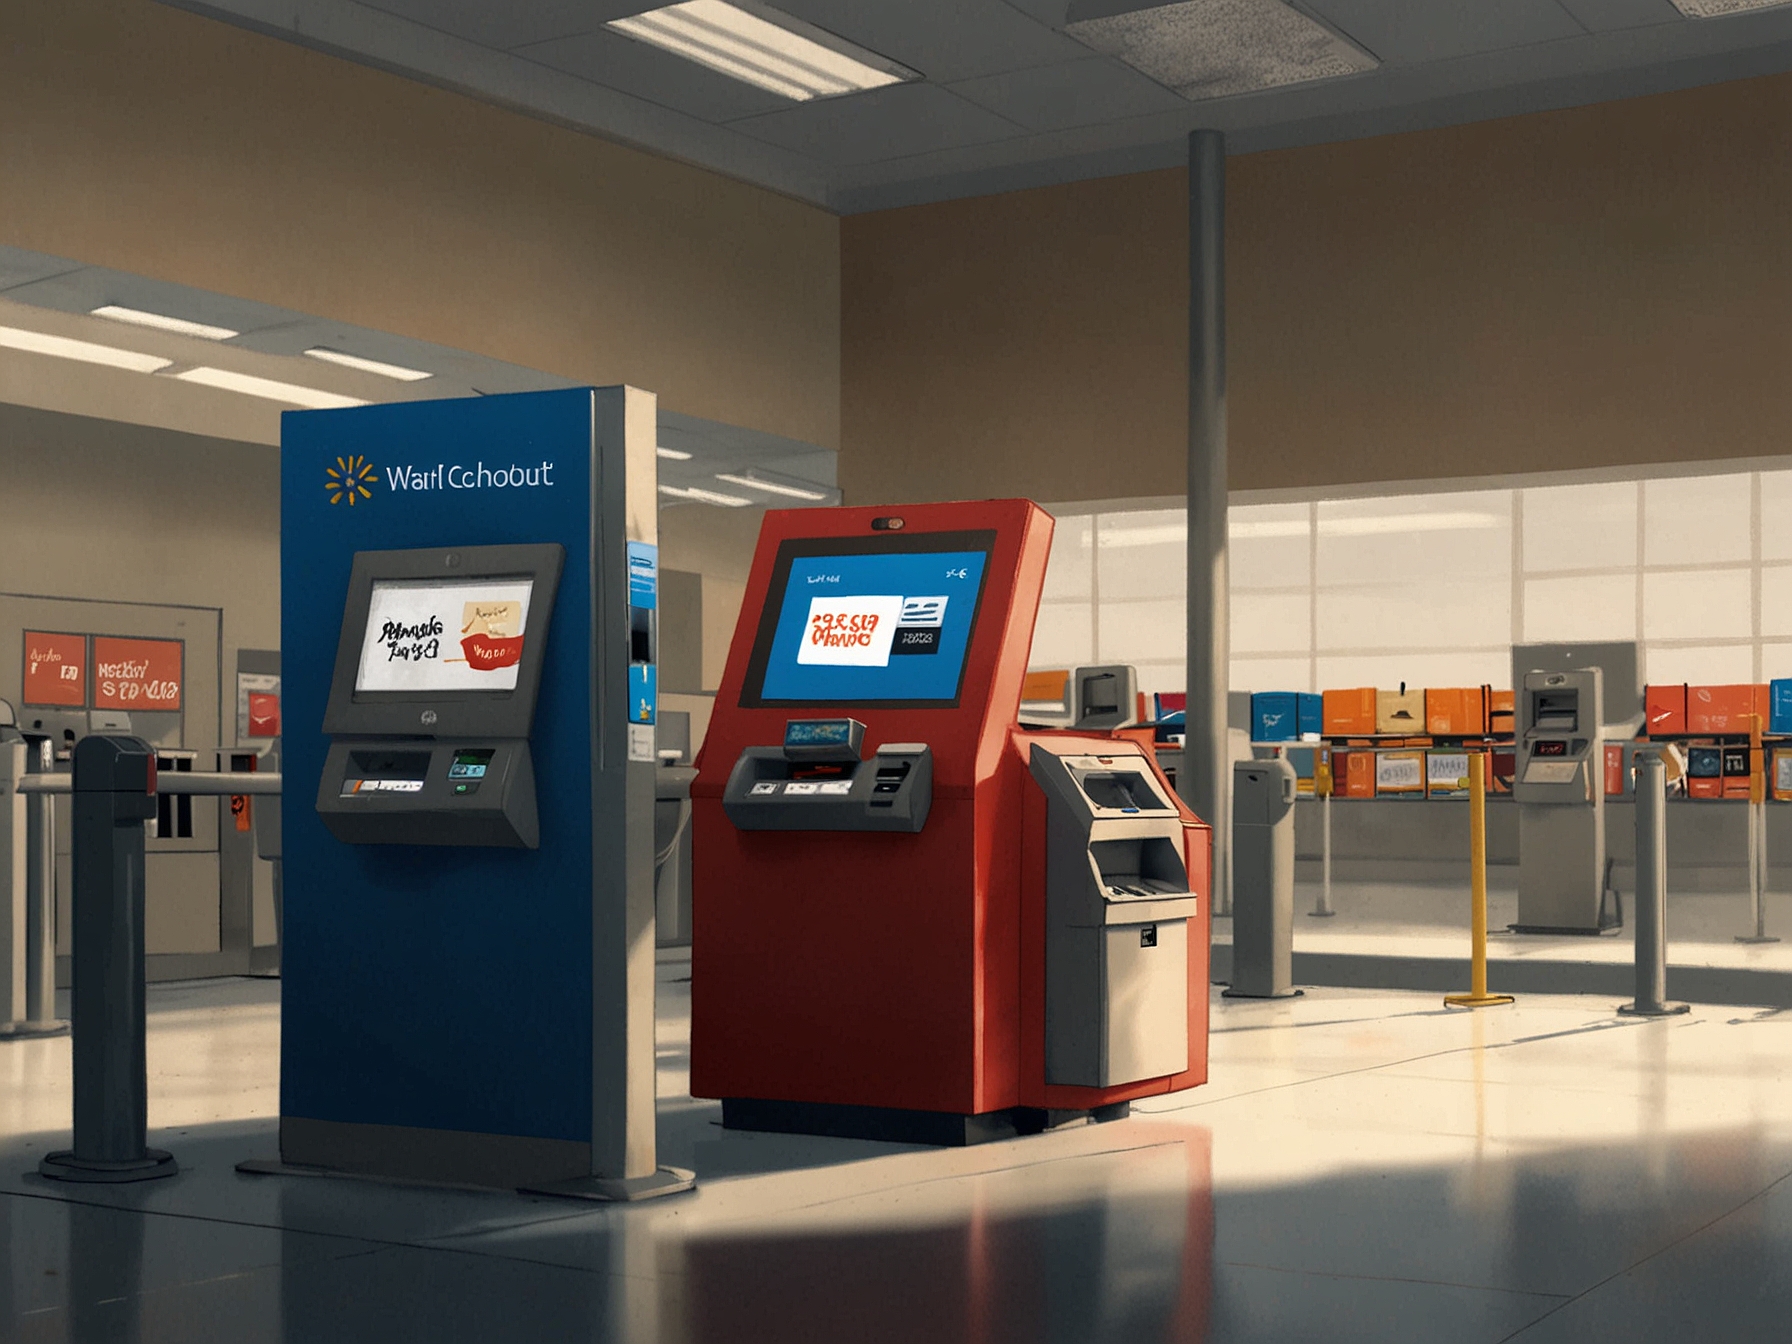 A Walmart self-checkout station with a sign indicating no cash payments accepted, illustrating the challenges faced by customers preferring or needing to use cash.